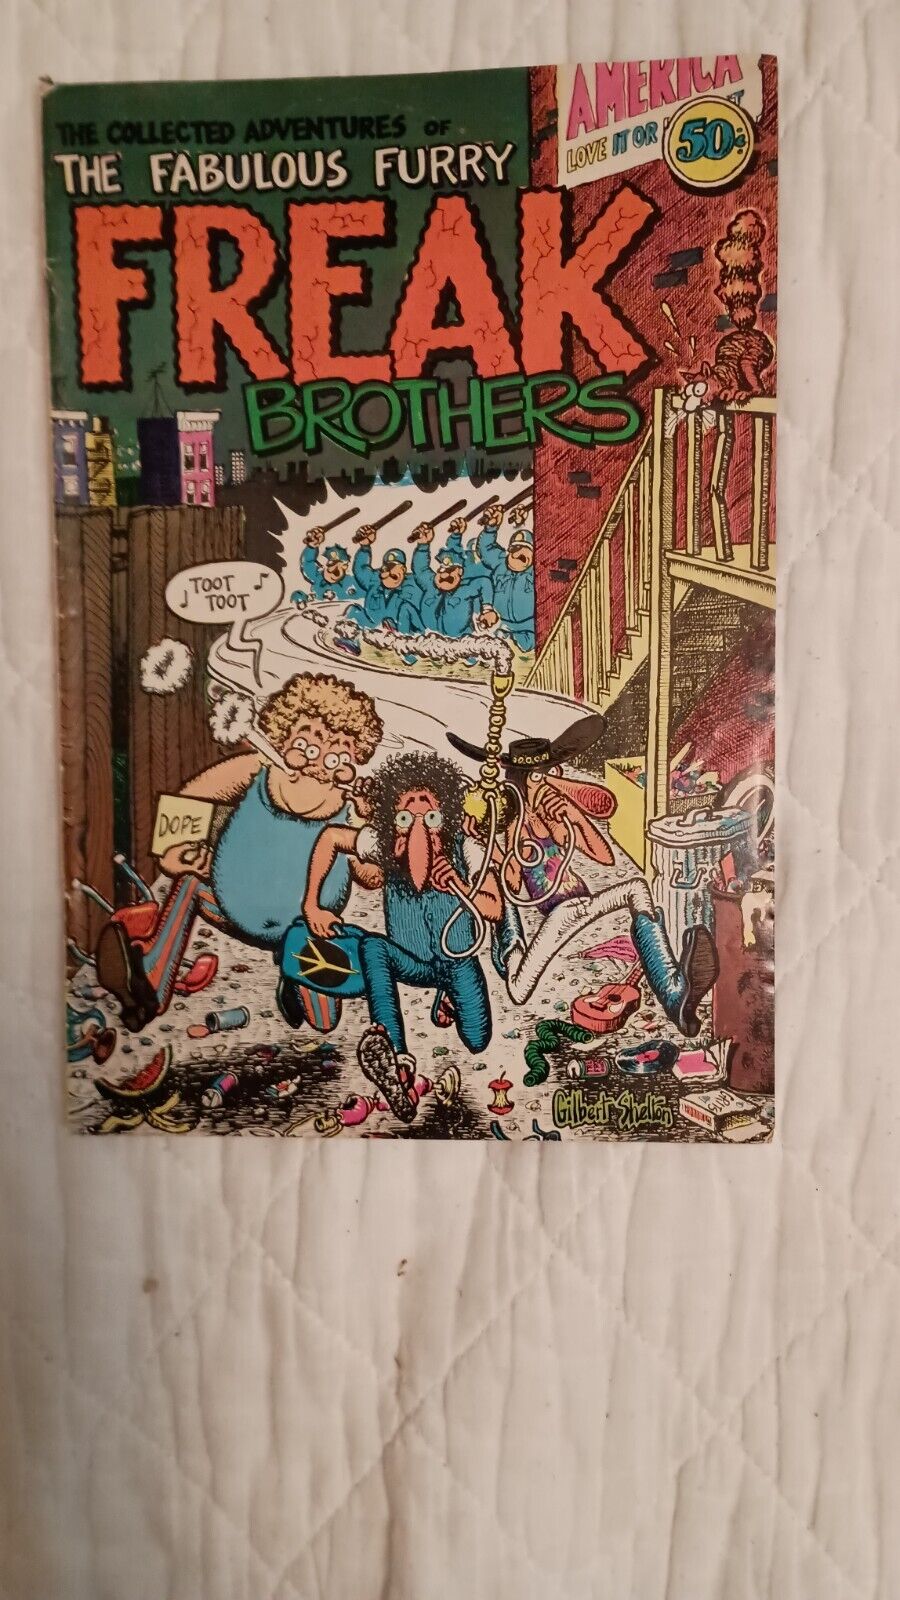 1971 THE COLLECTED ADVENTURES OF THE FABULOUS FURRY FREAK BROTHERS #1 VG COND